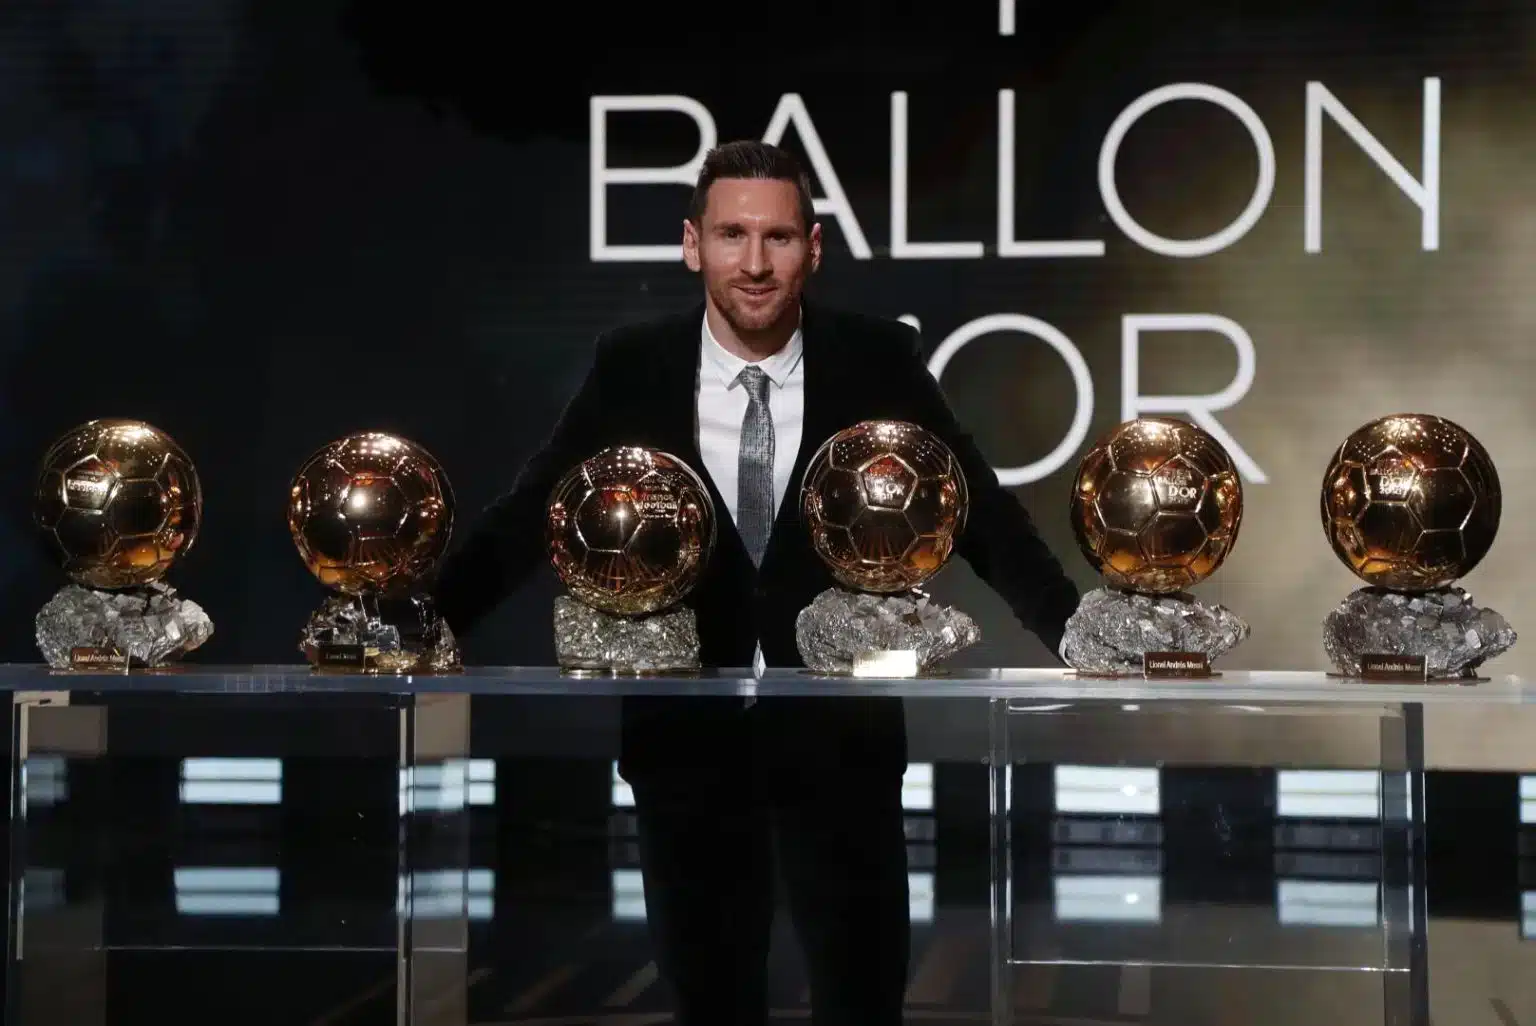 Messi's Controversial Eighth Ballon d'Or Trophy Gifted To Barcelona